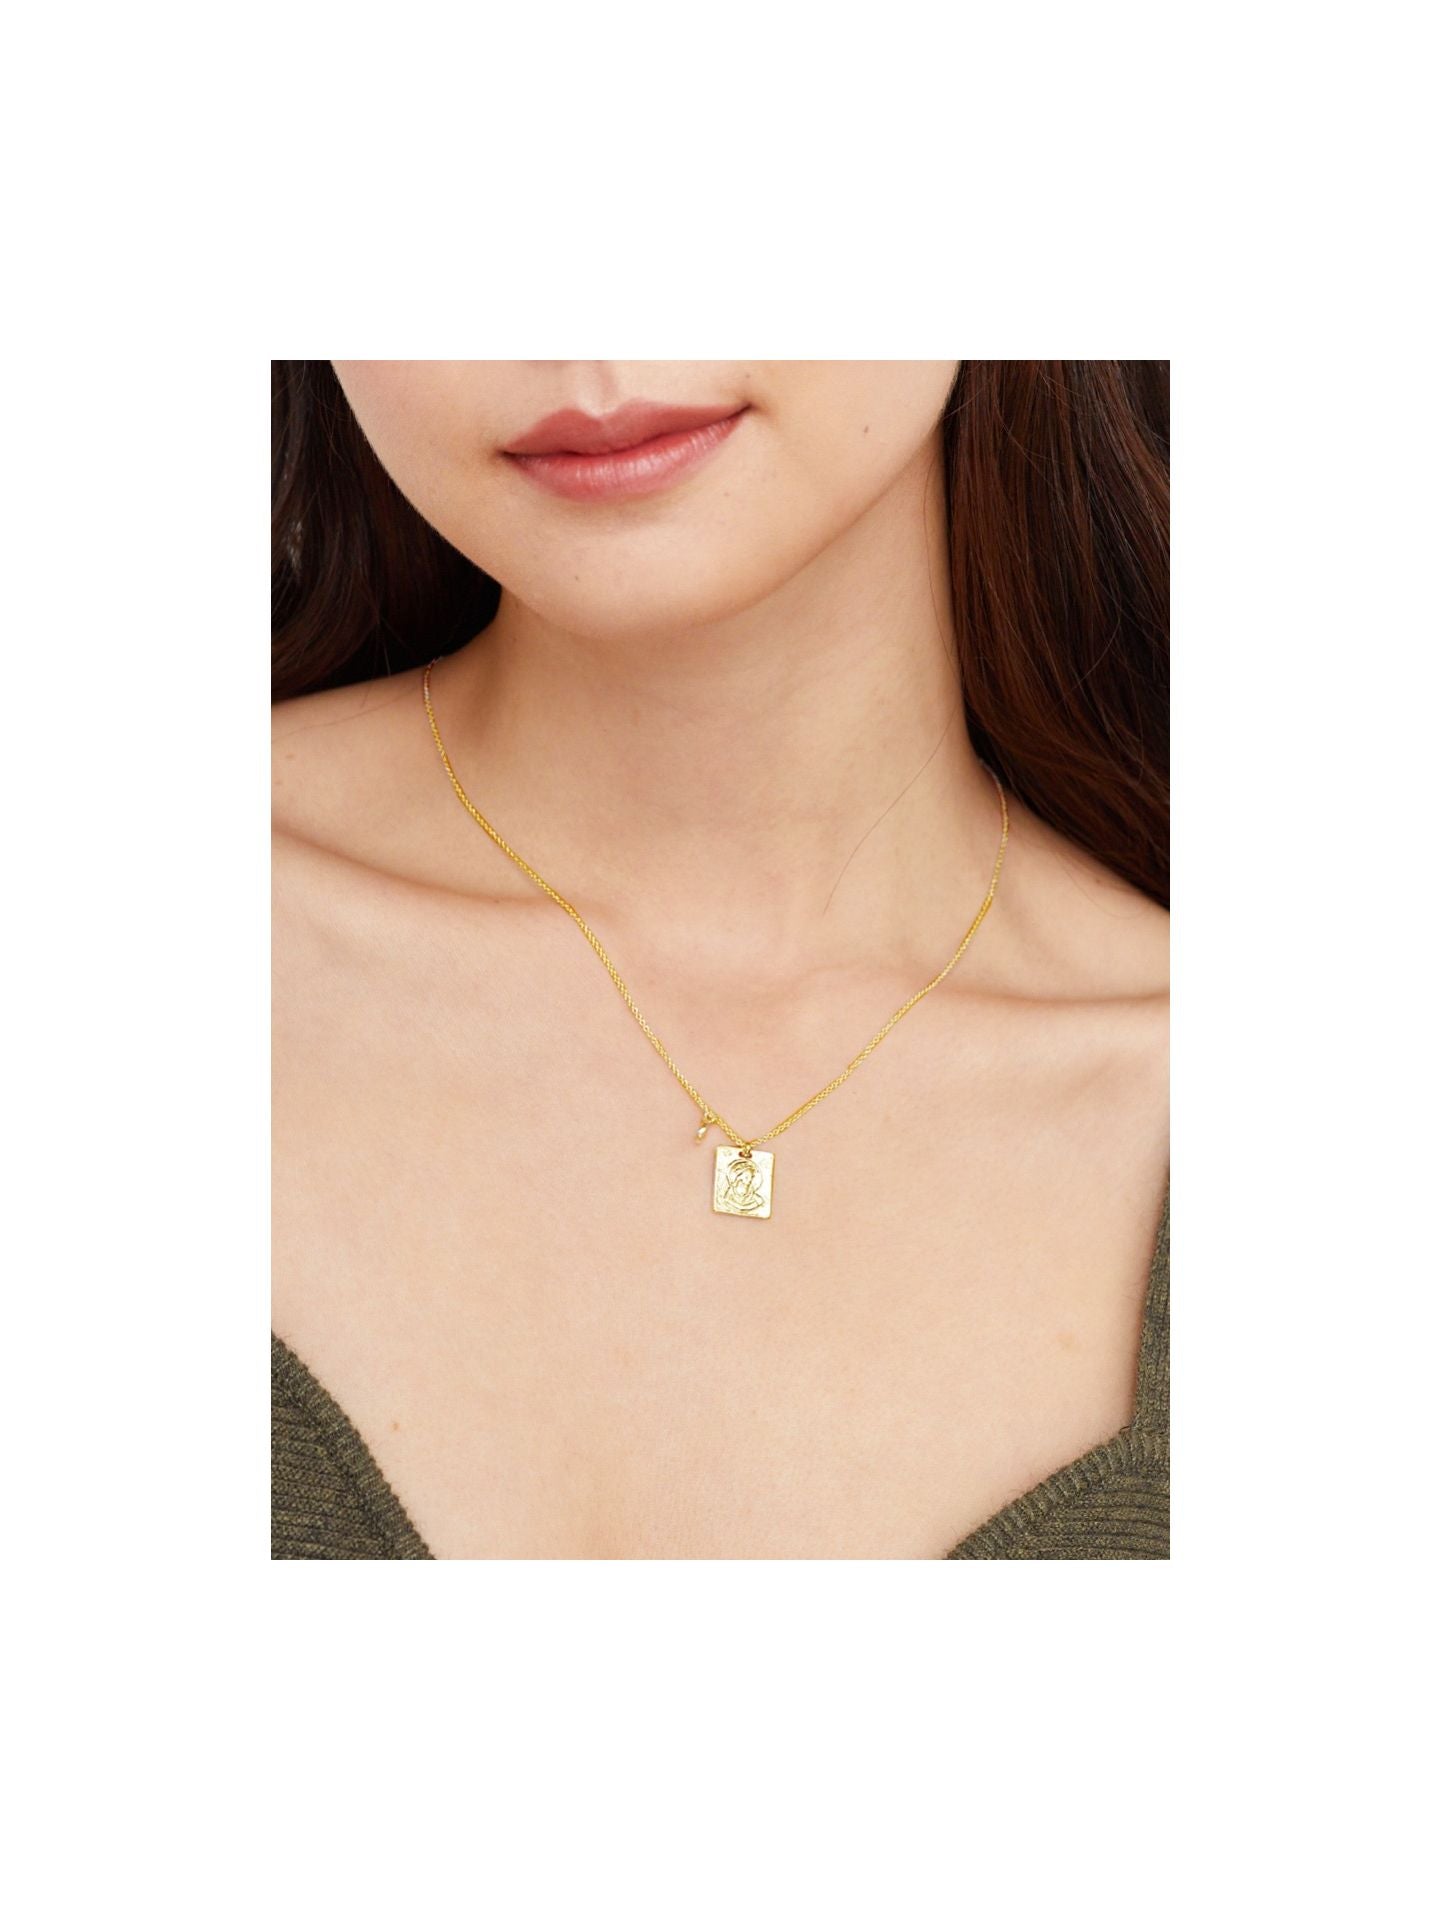 Angels Whisper Theta Gold Plated Charm Necklace